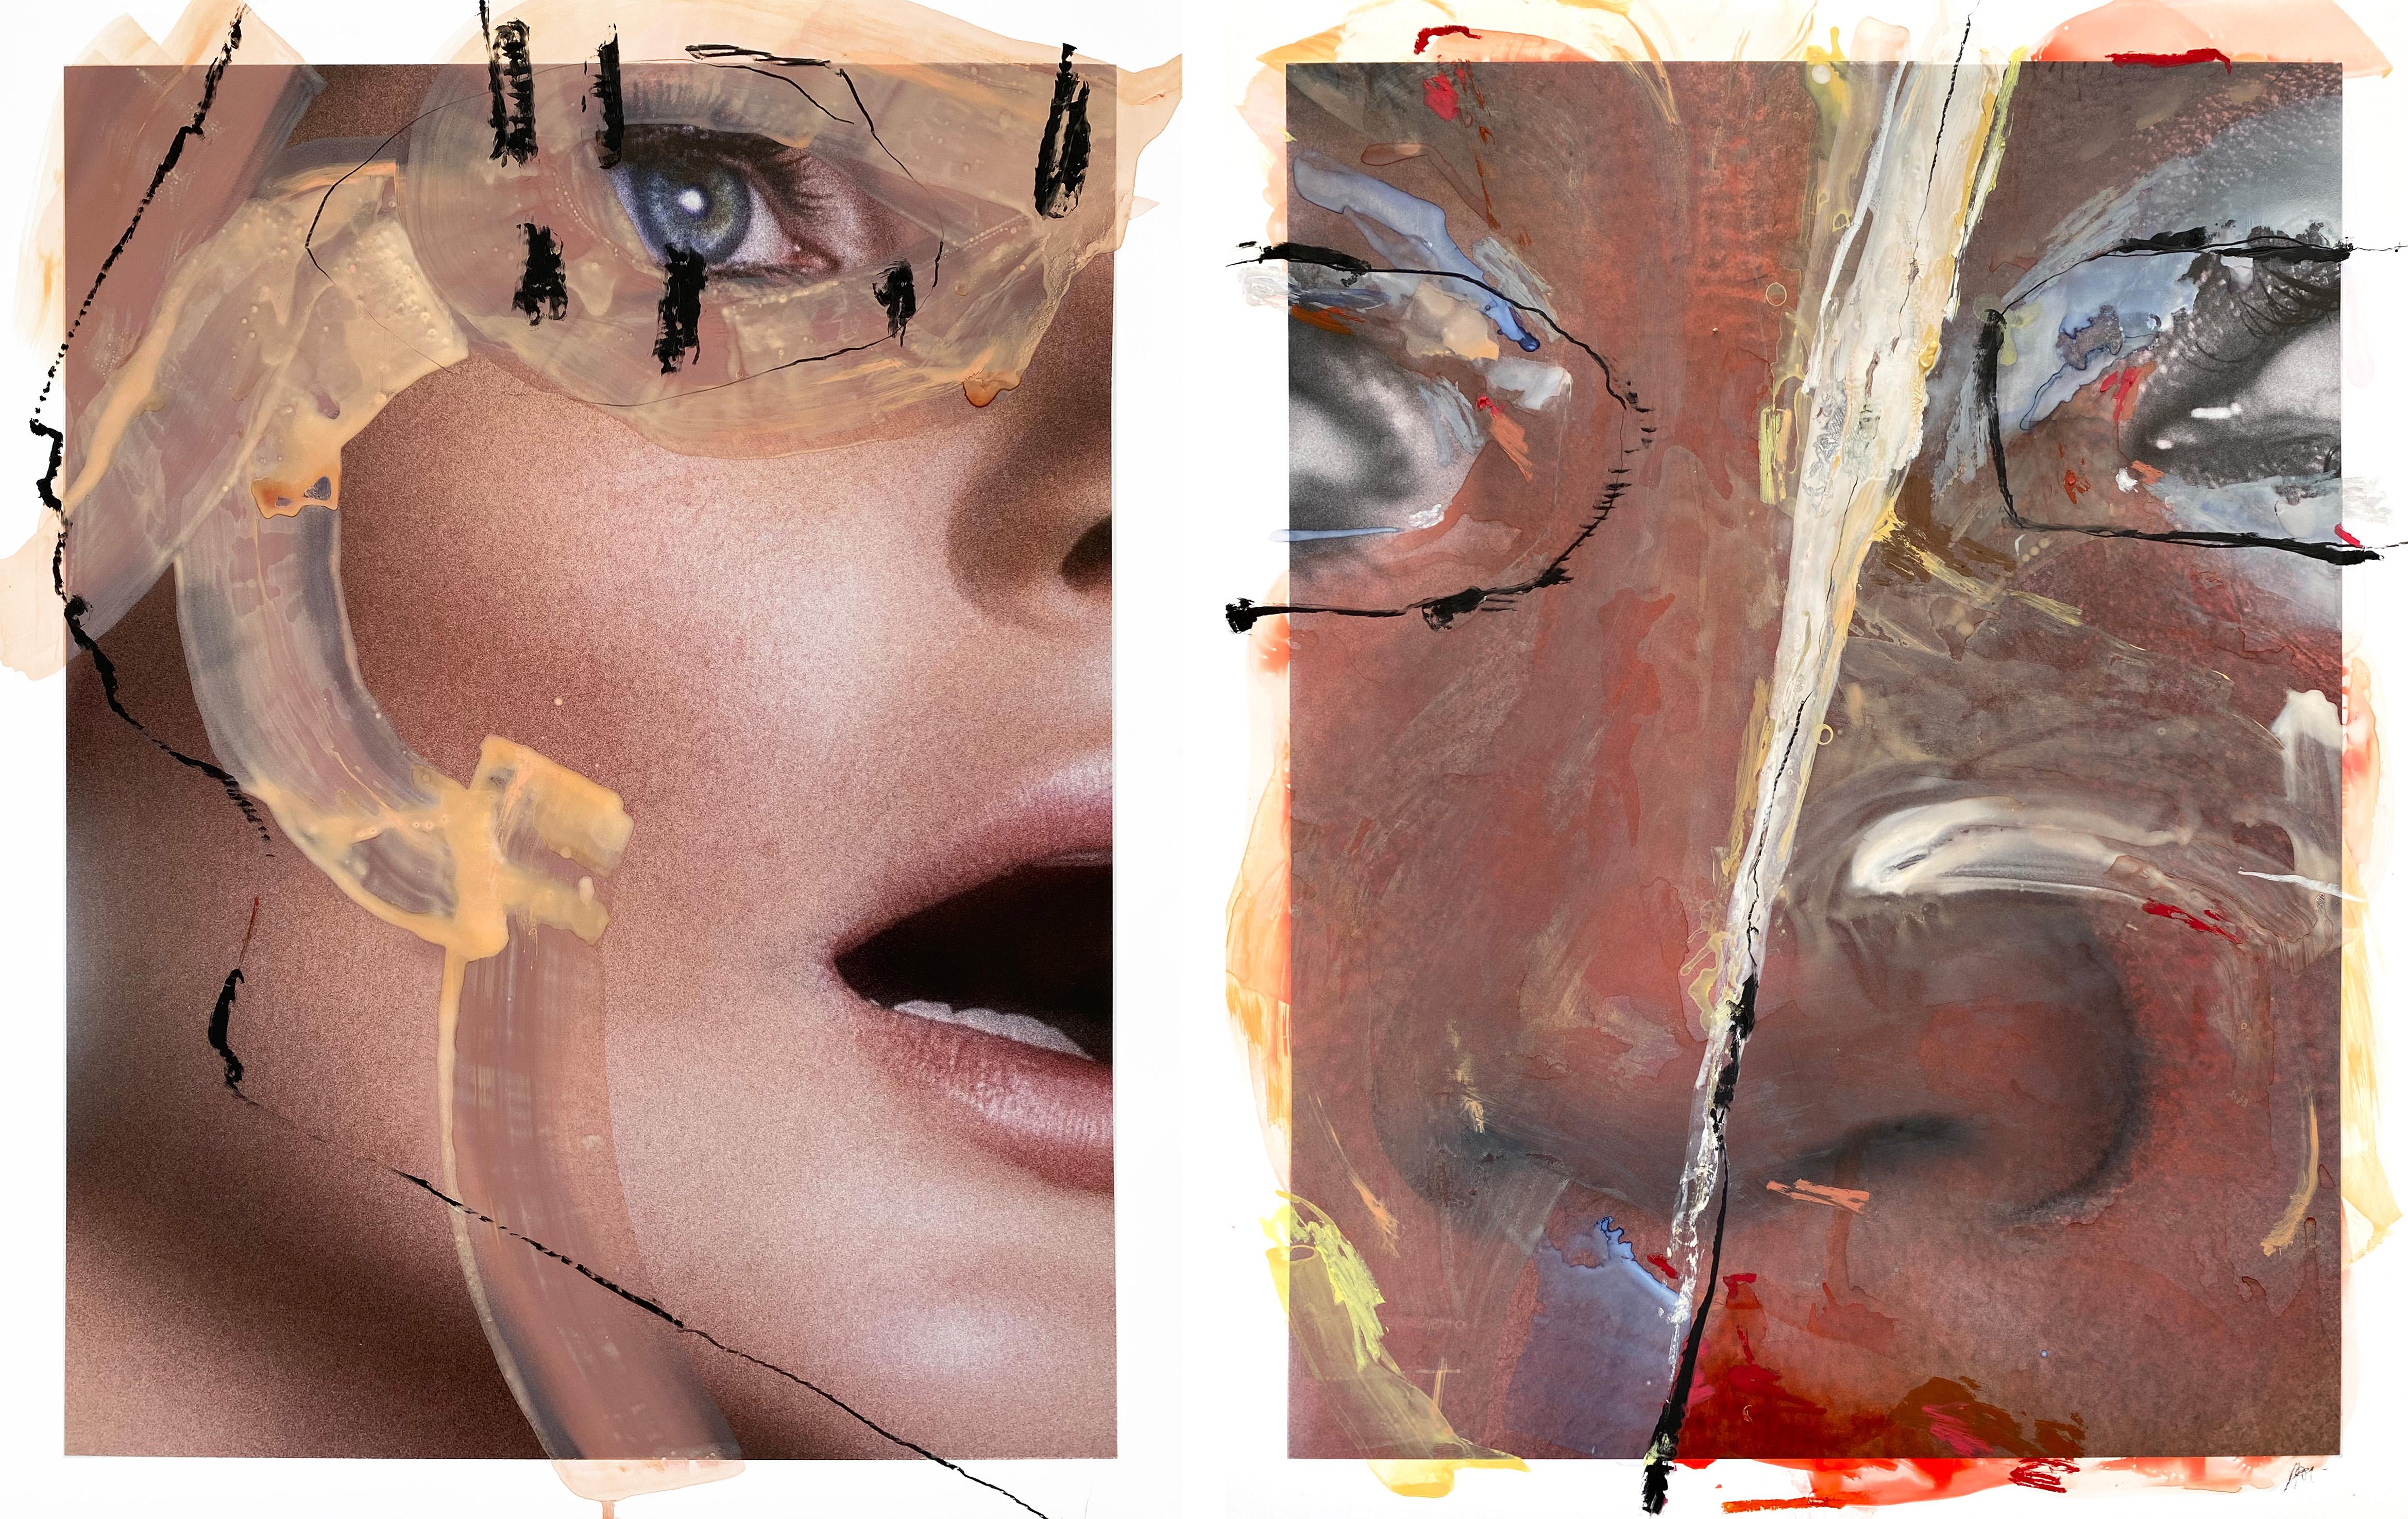 Hunter & Gatti Figurative Painting - E and V Diptych, From the series Opposed Tendencies. Mixed media photography